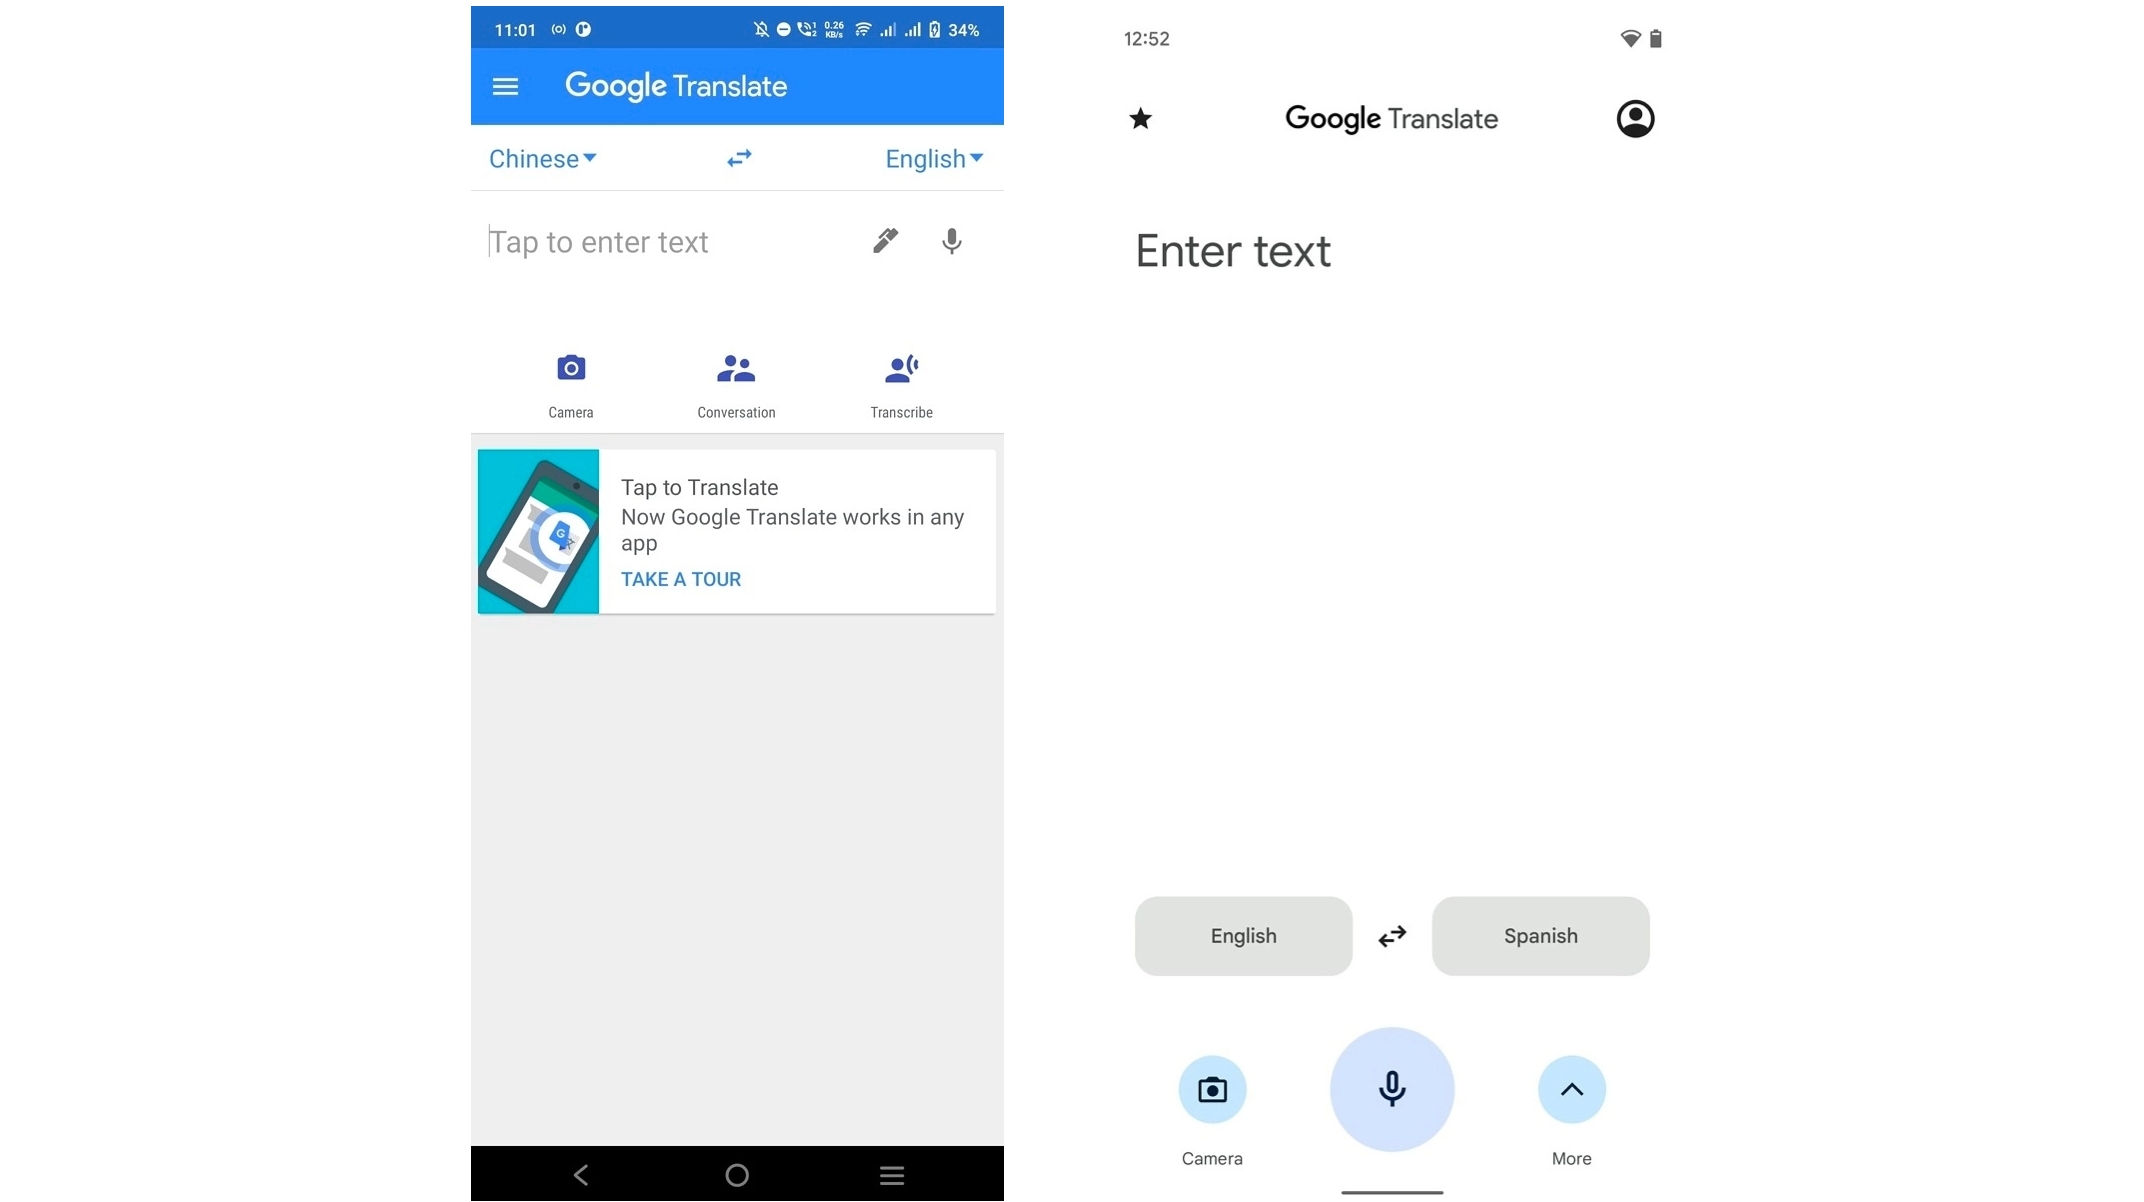 Screenshots showing the current Google Translate UI on the left, and the possible new one on the right